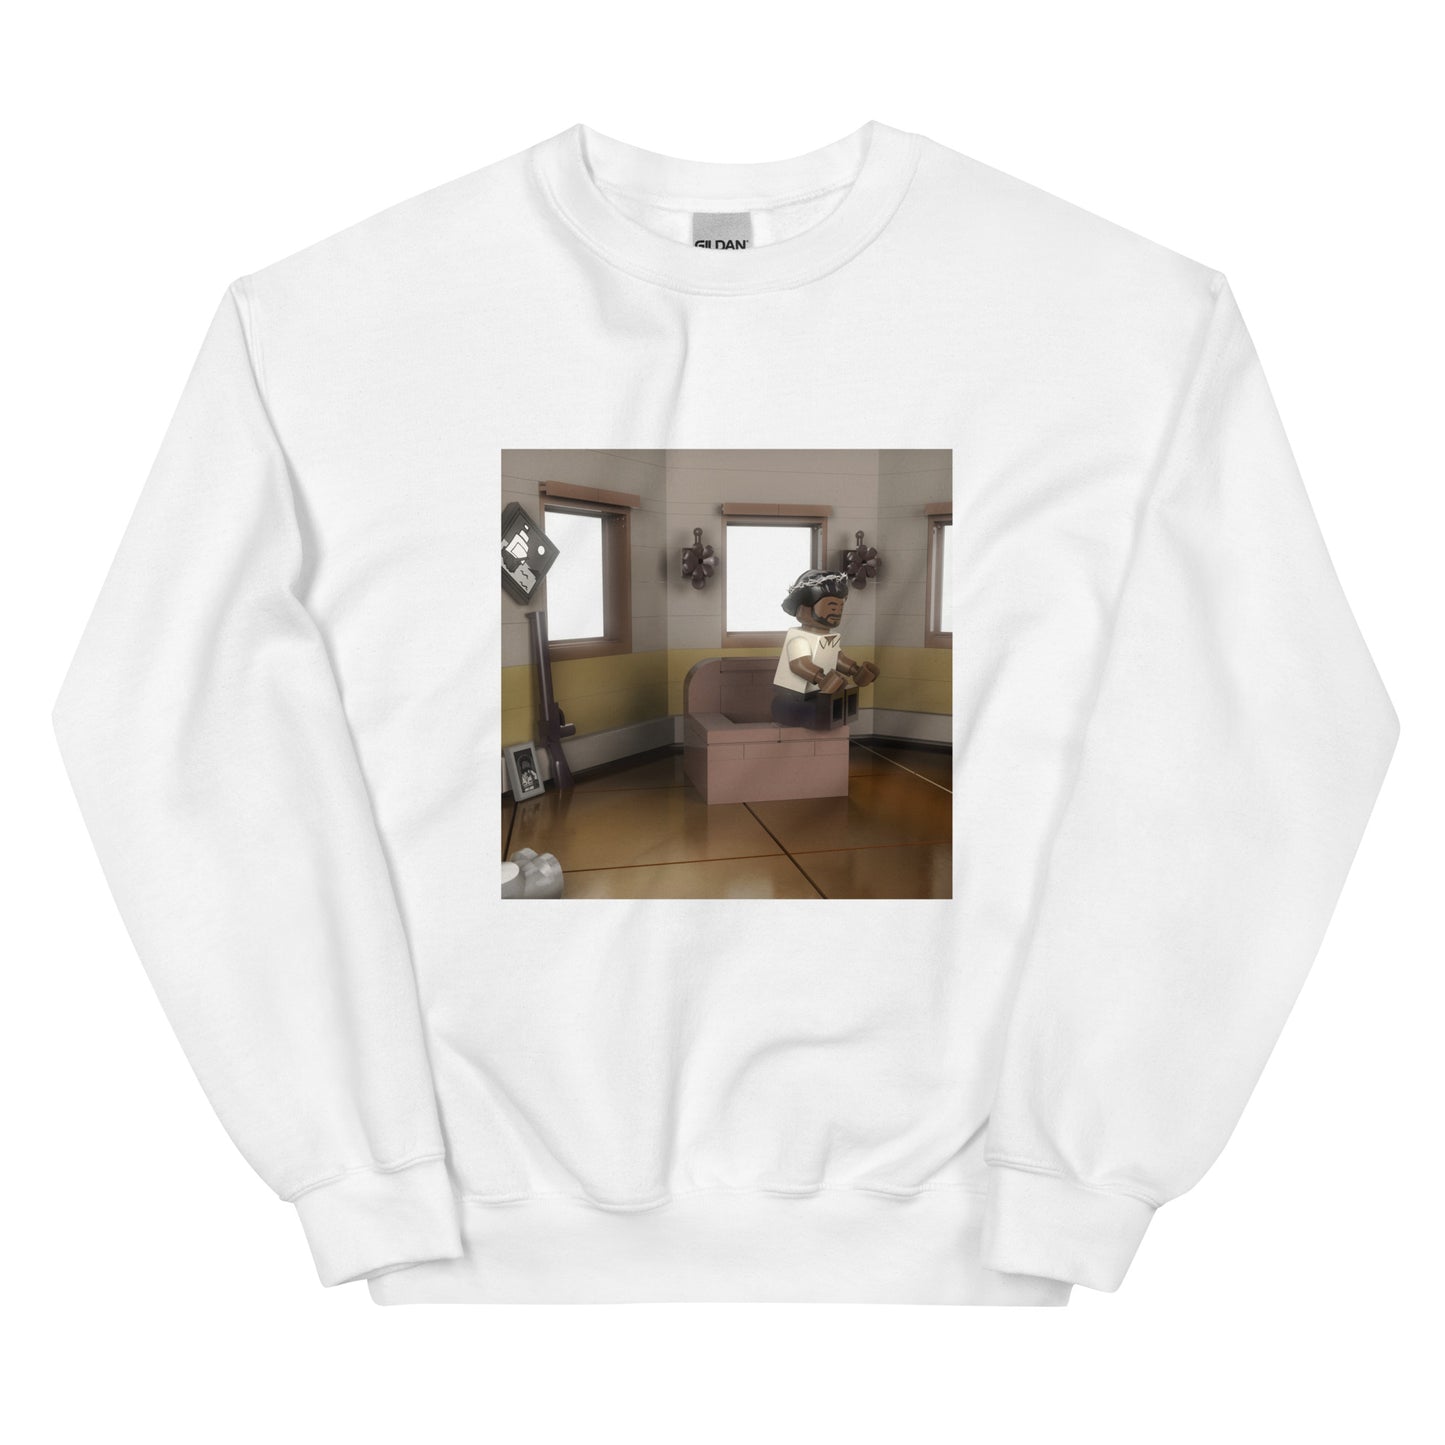 "Kendrick Lamar - Mr. Morale & the Big Steppers (Physical "Back" Cover)" Lego Parody Sweatshirt